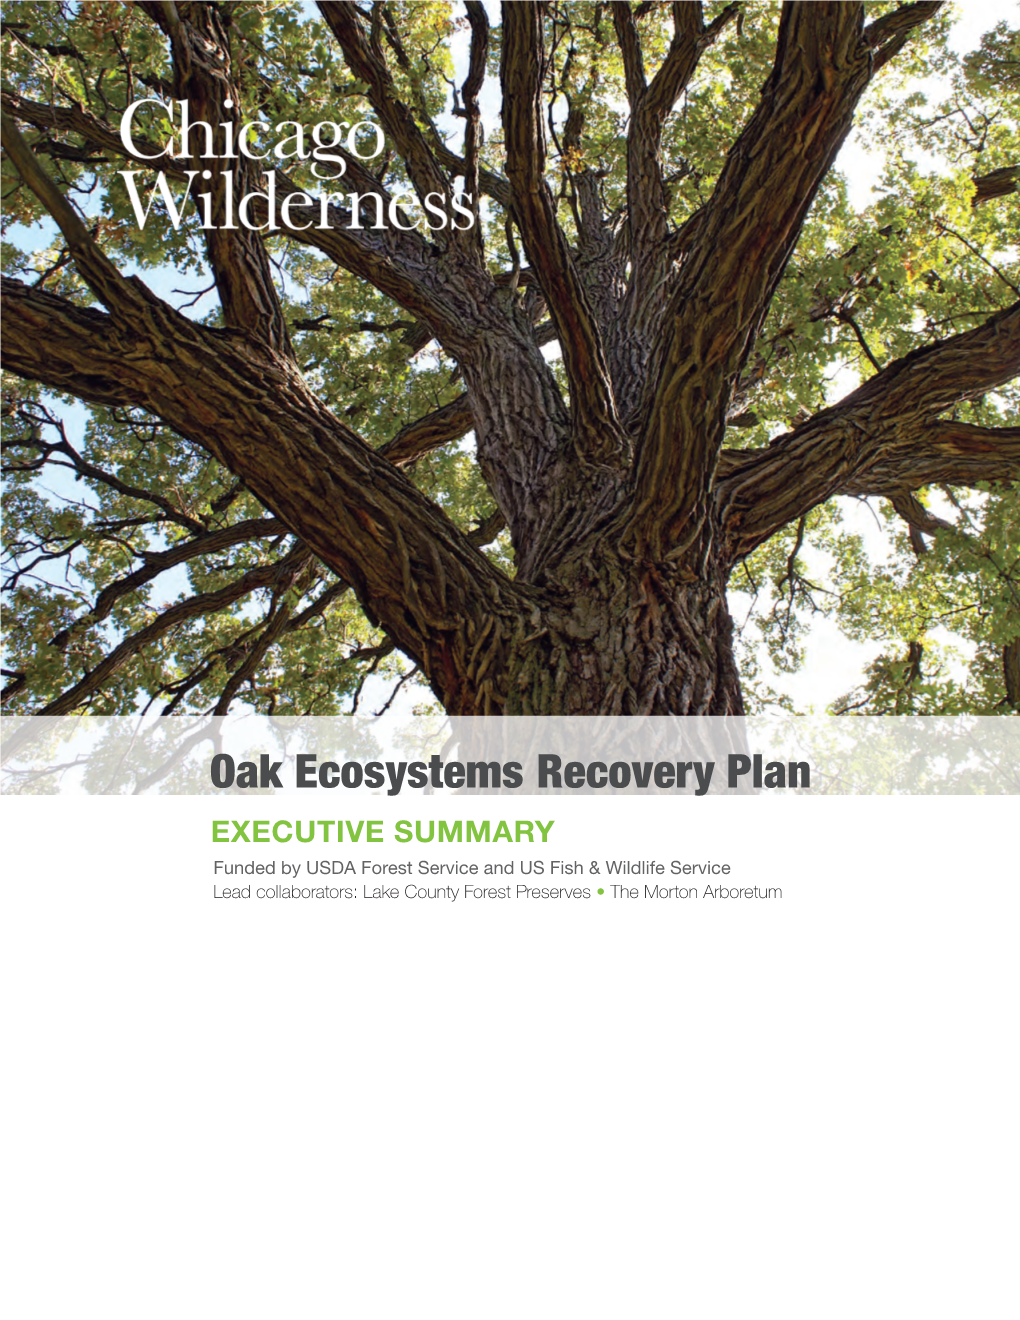 Chicago Wilderness Oak Ecosystems Recovery Plan